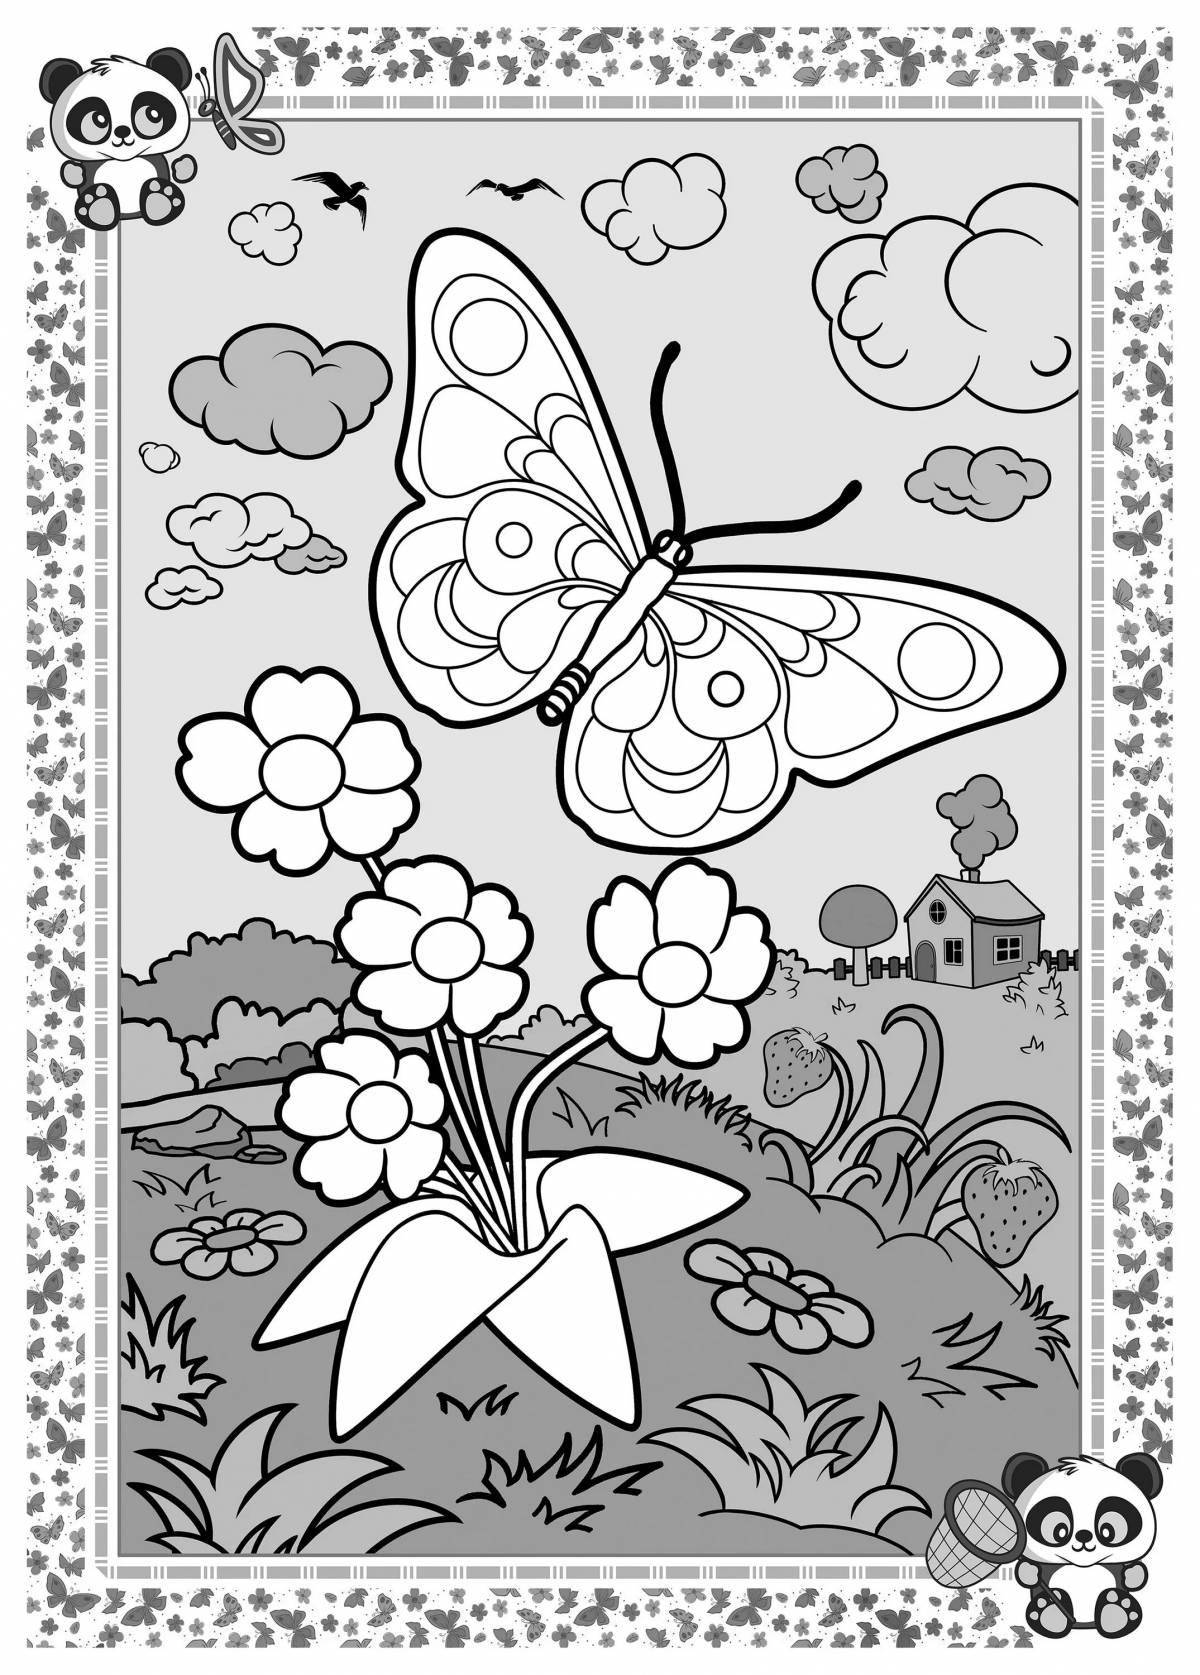 Radiant resurrection coloring book